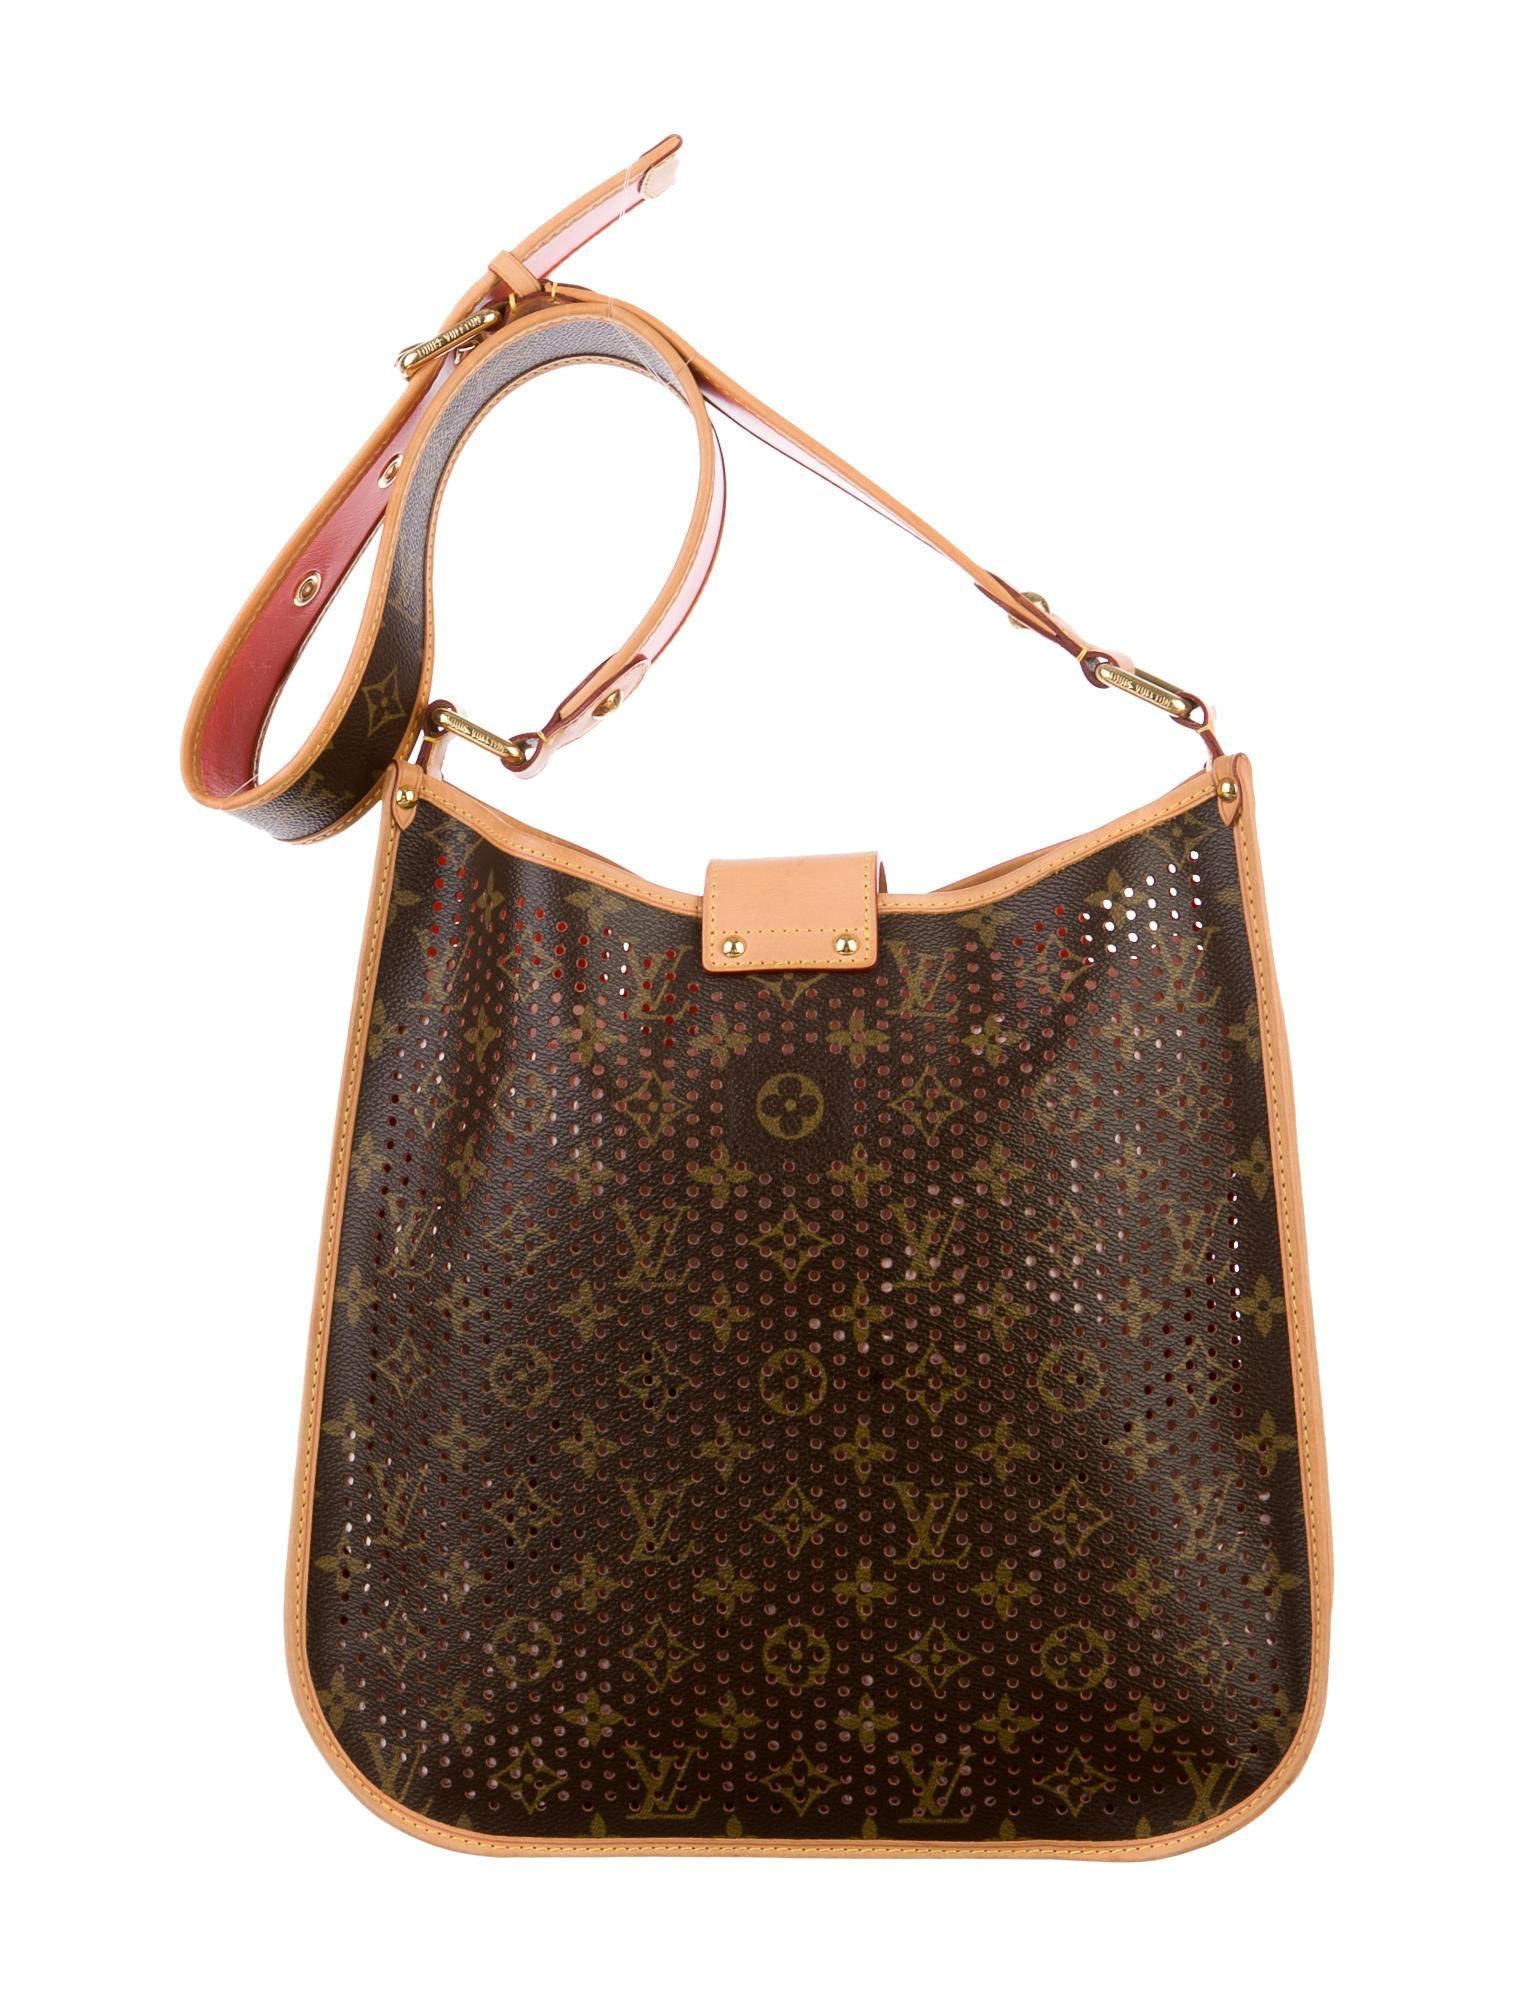 Limited Edition Spring 2006. Brown and tan monogram coated canvas Louis Vuitton Perforated Mussette Bag with vachetta leather trim, brass hardware, exterior pocket, adjustable shoulder strap, single interior pocket and lock applique at flap